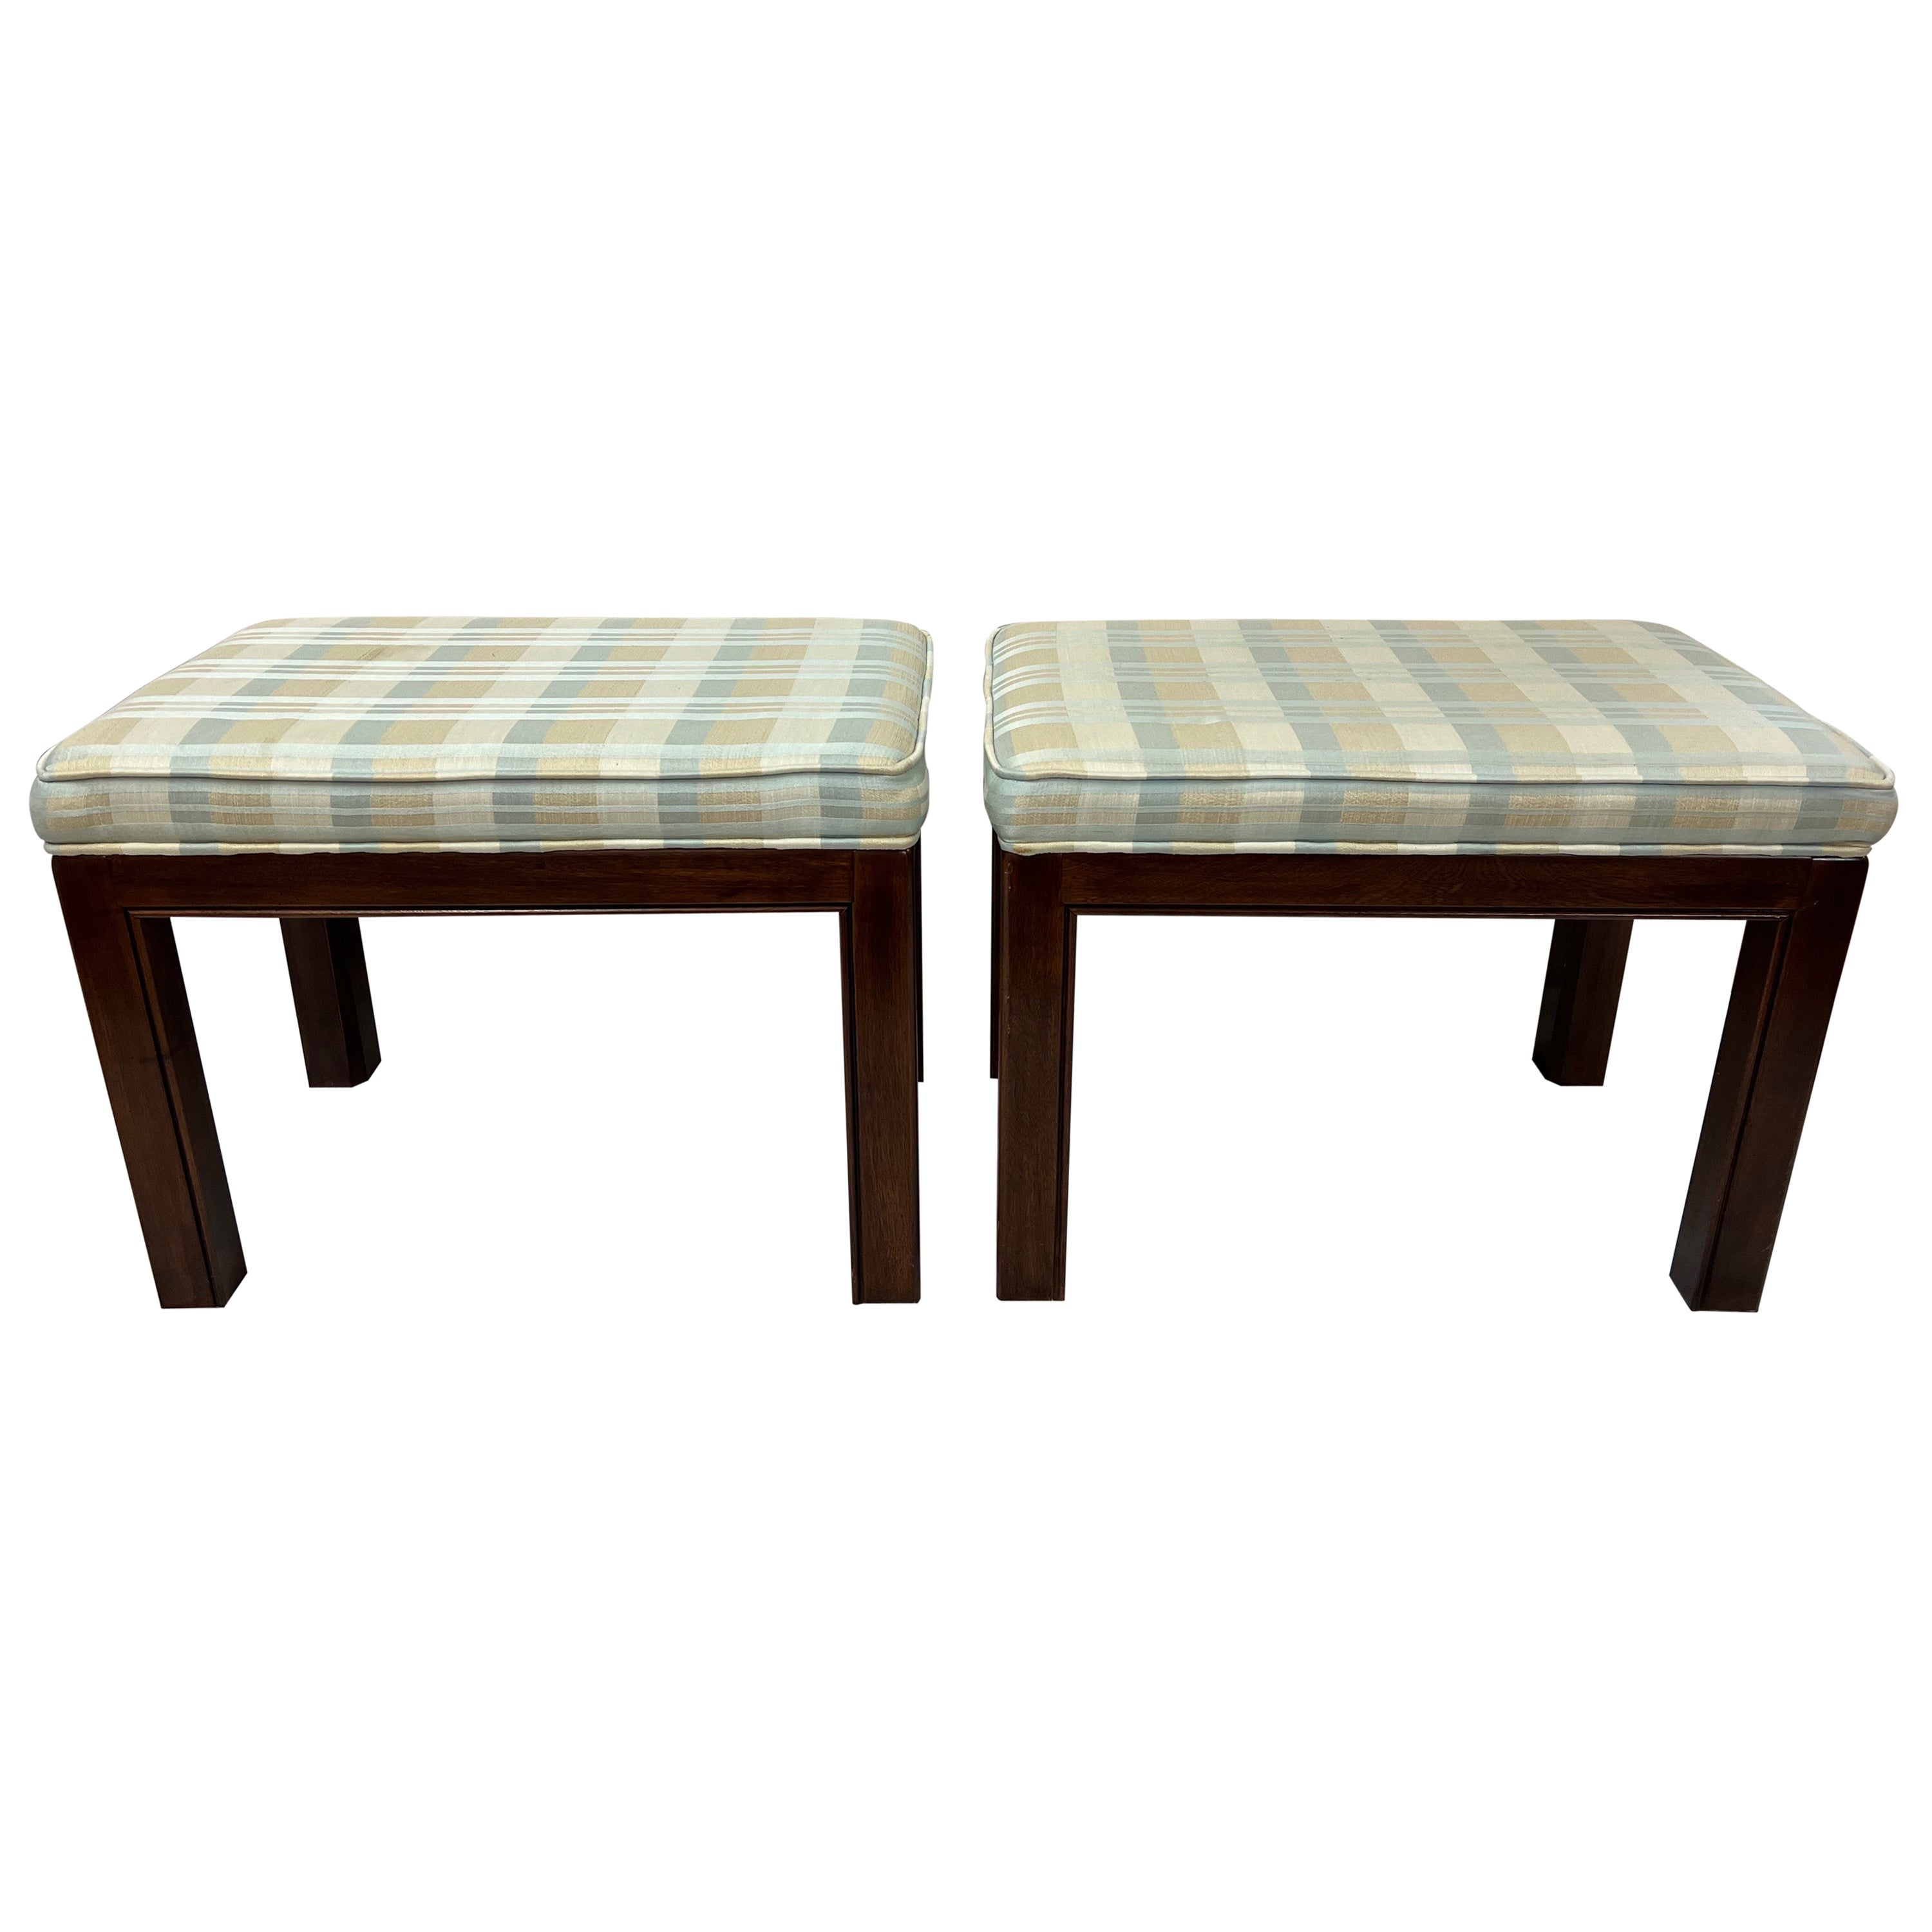 Pair of Drexel Heritage Ottomans or Stools